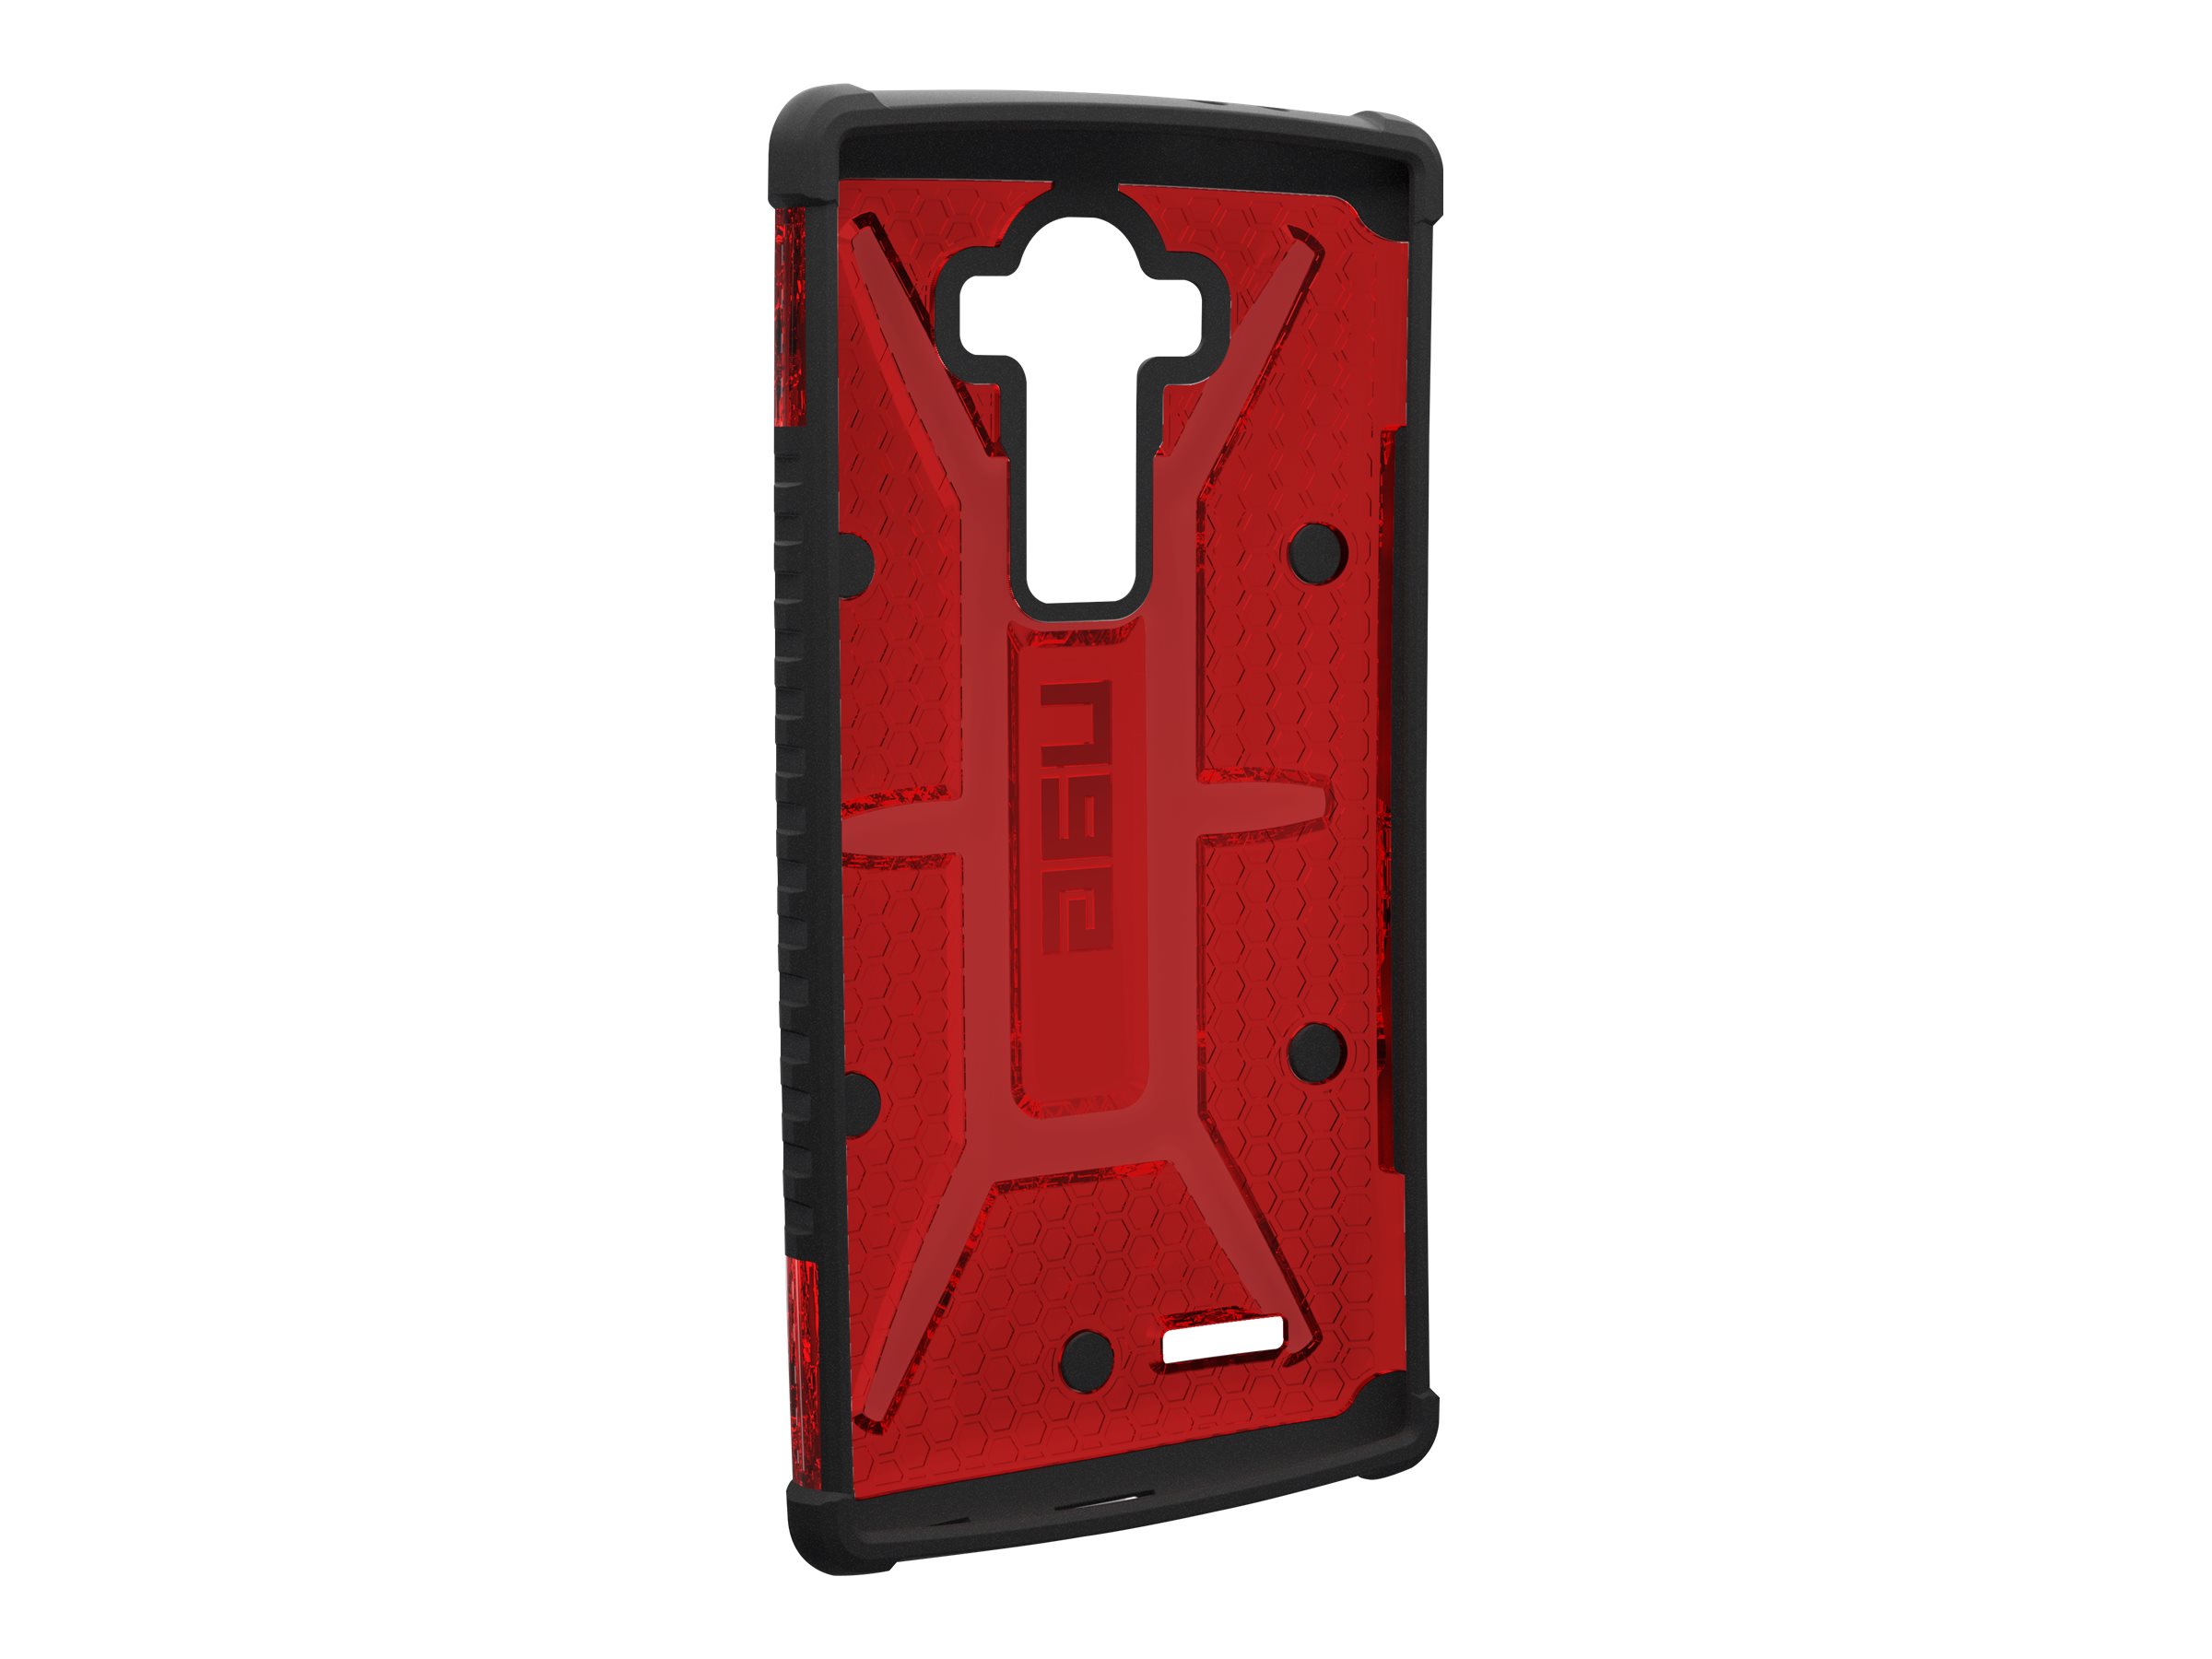 Urban Armor Gear Magma Case for LG G4 - image 3 of 5